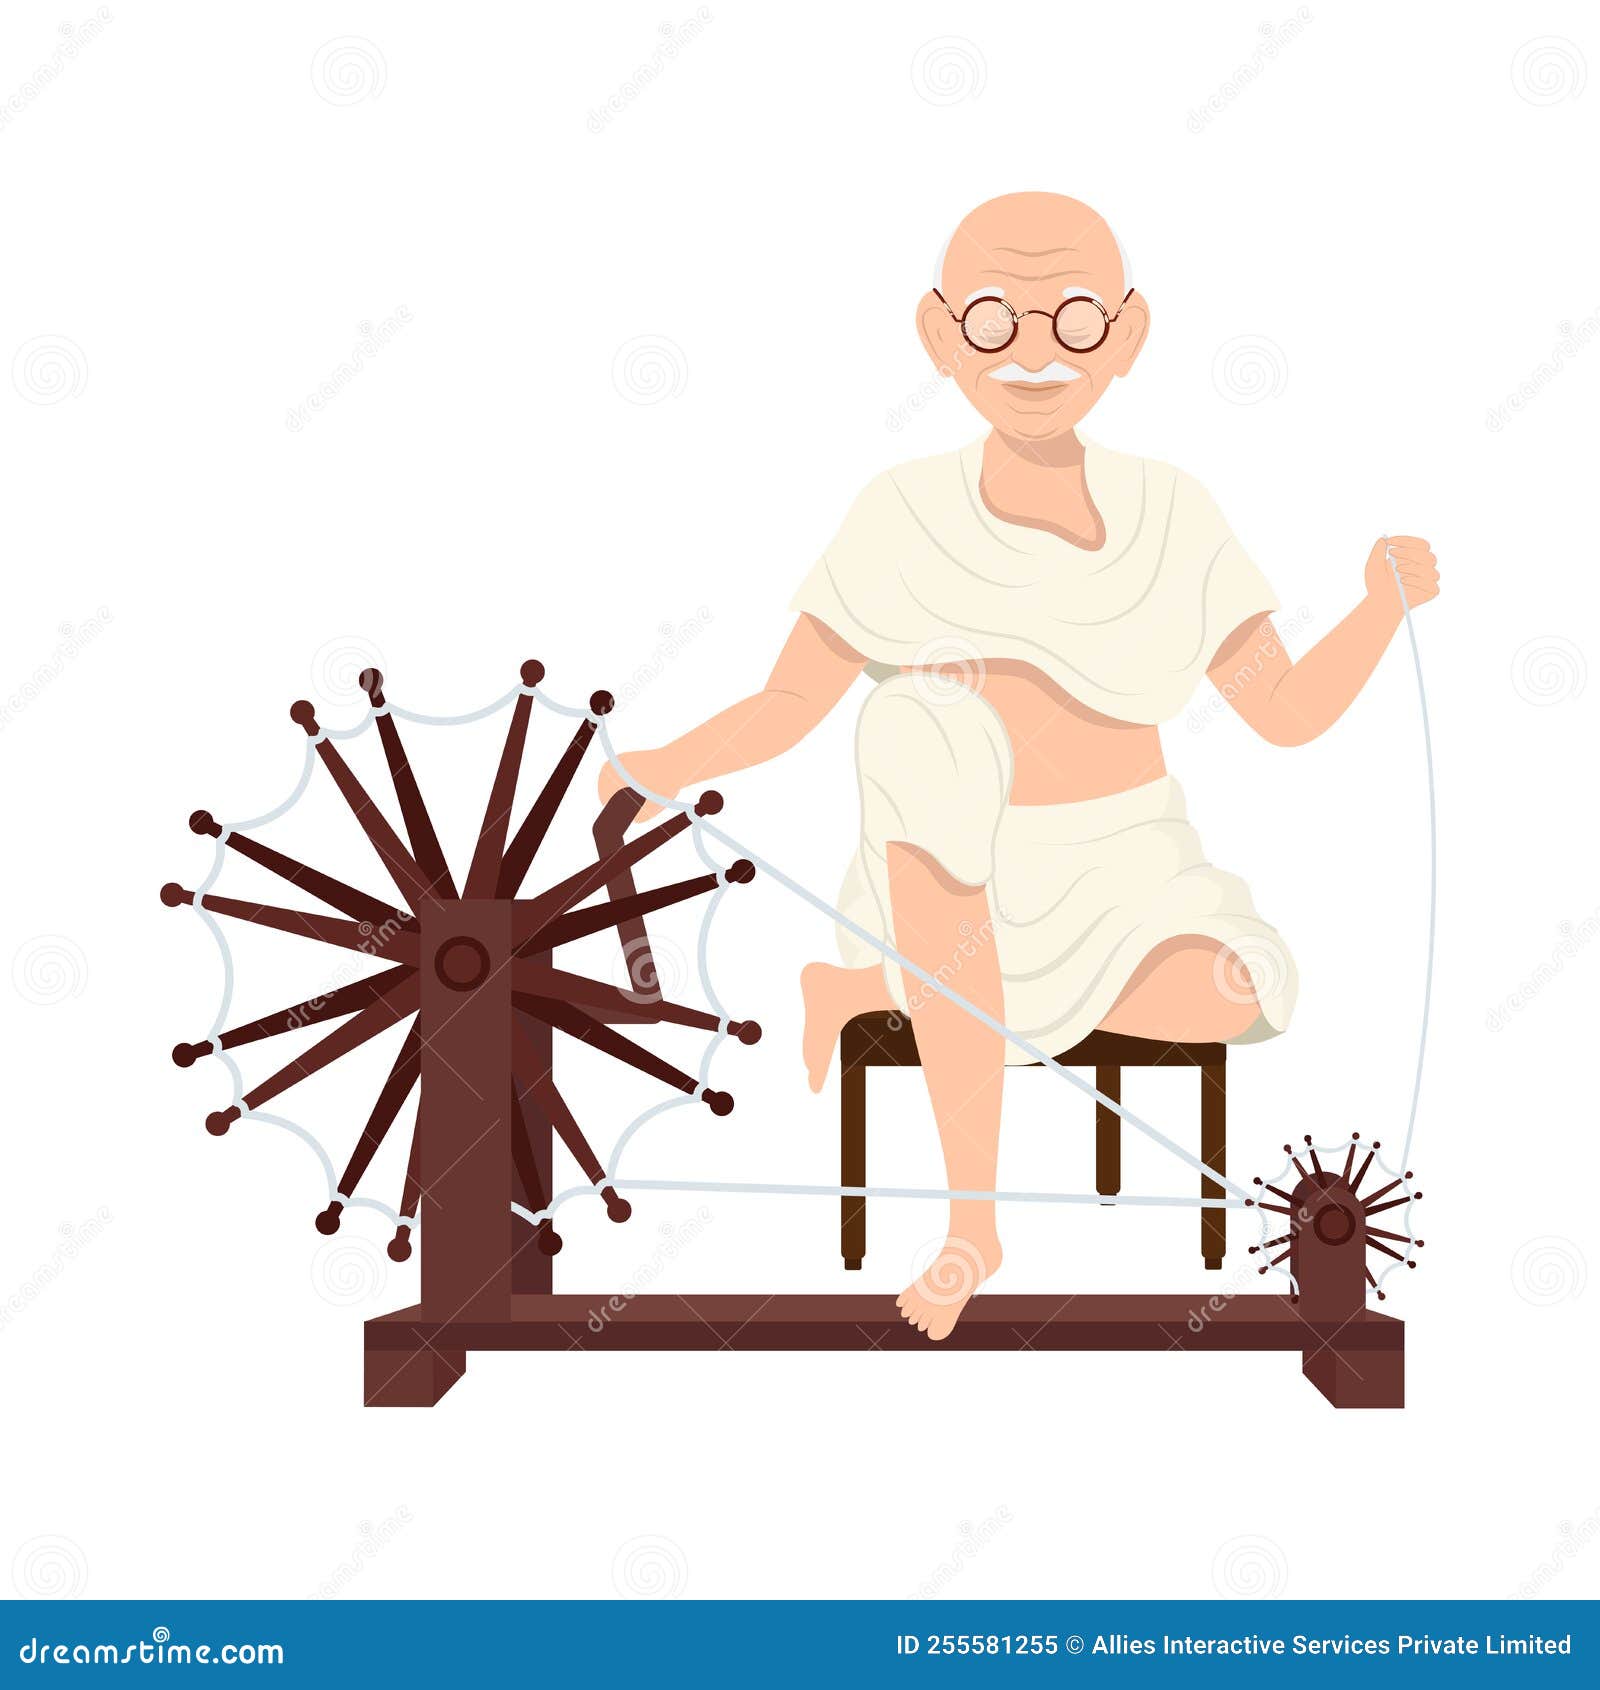 Catalign Innovation Consulting: Story of Gandhi's 1920 Charkha challenge: A  critical look